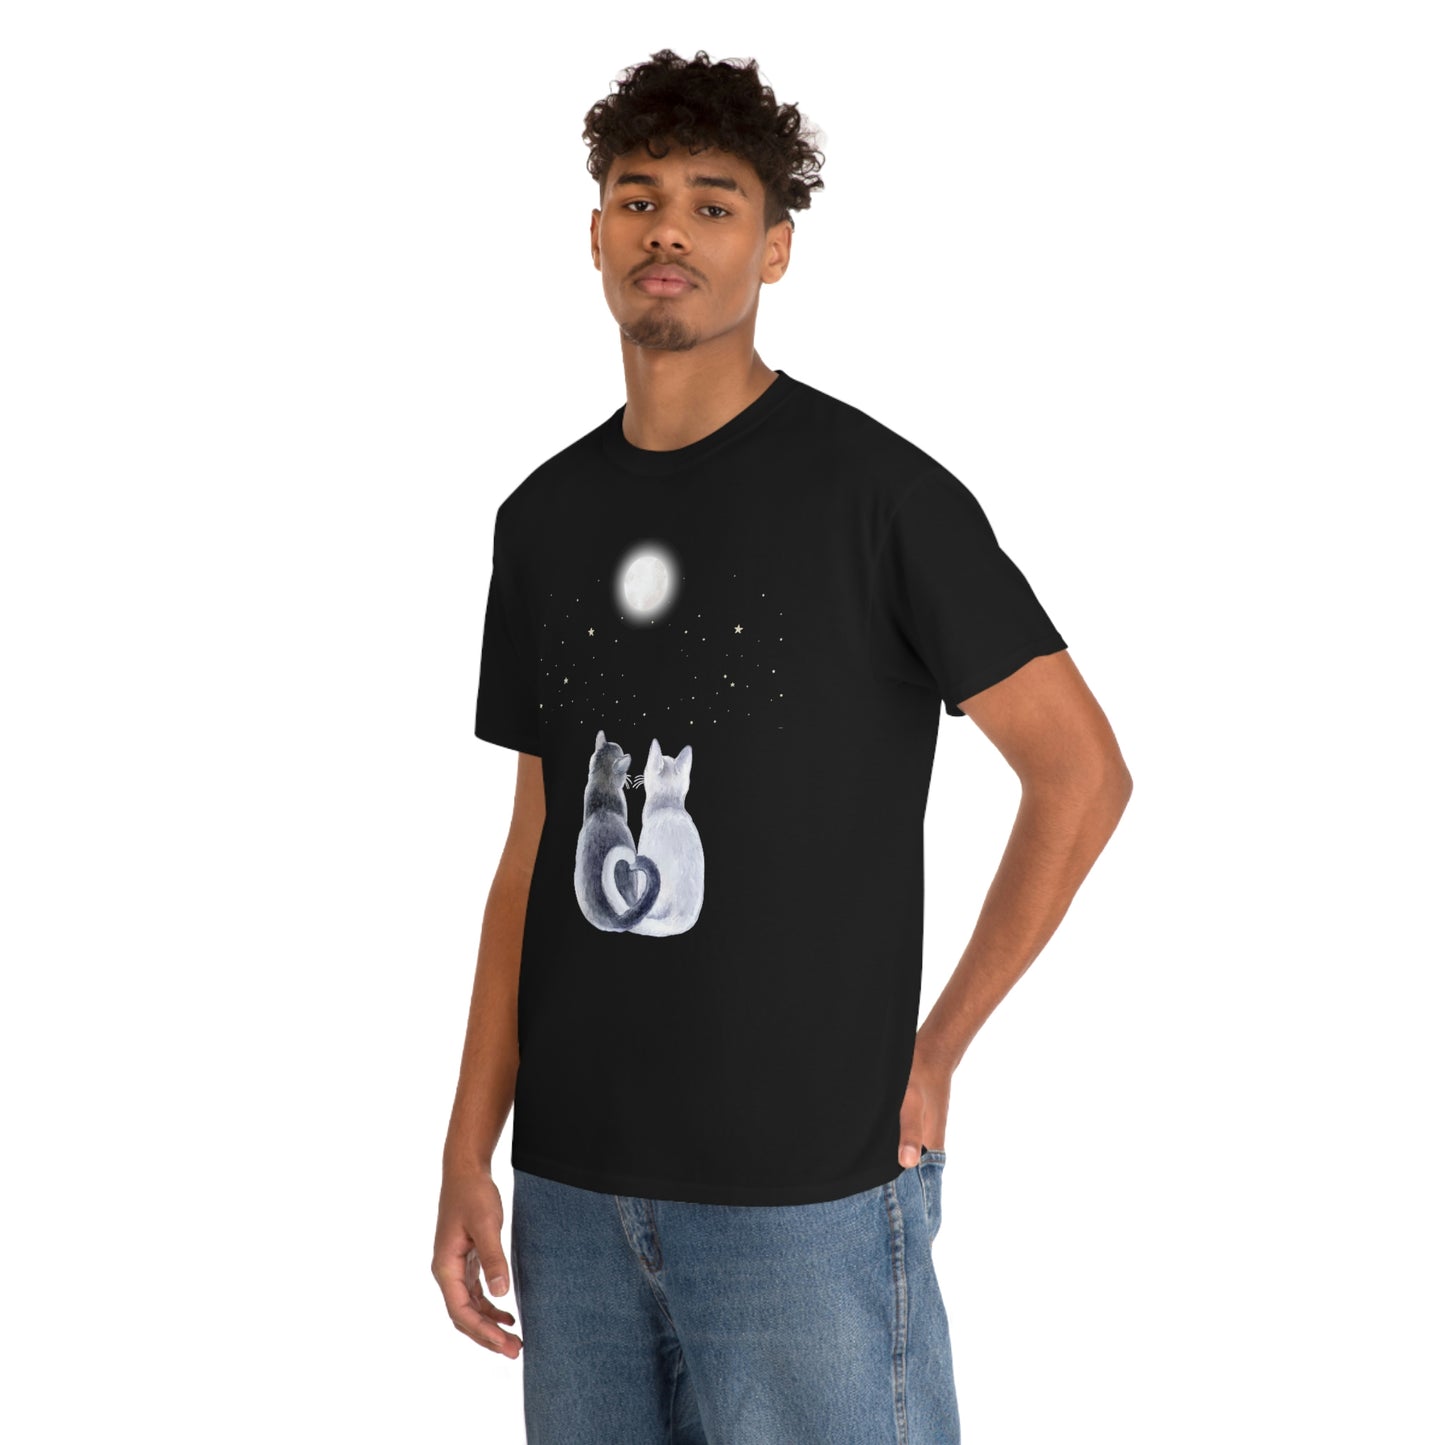 " Cats Mesmerized by the Full Moon's Glow" design Black Cotton Tee